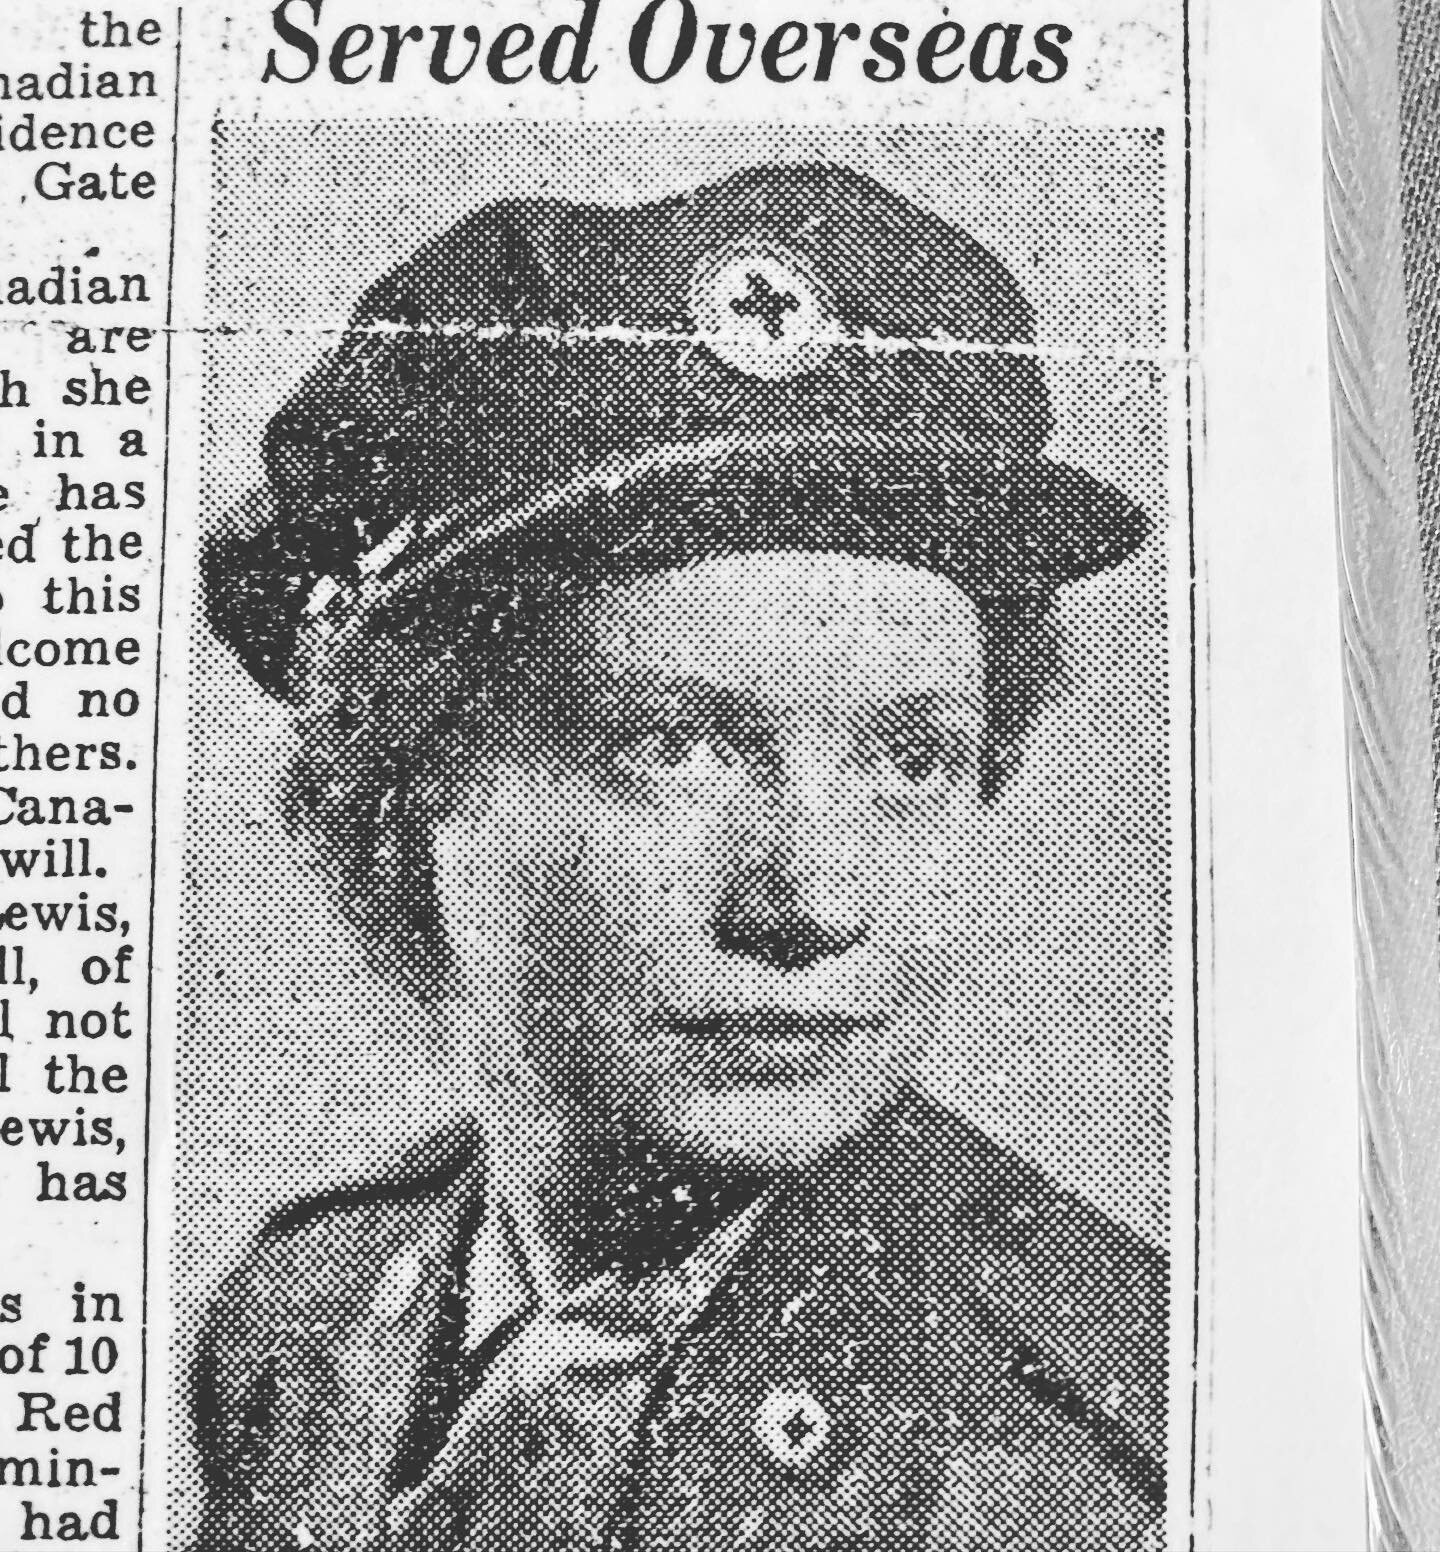 My grandma Lewis, served overseas in England with the Red Cross, in food and nutrition administration #lestweforget🌹 
#remembranceday